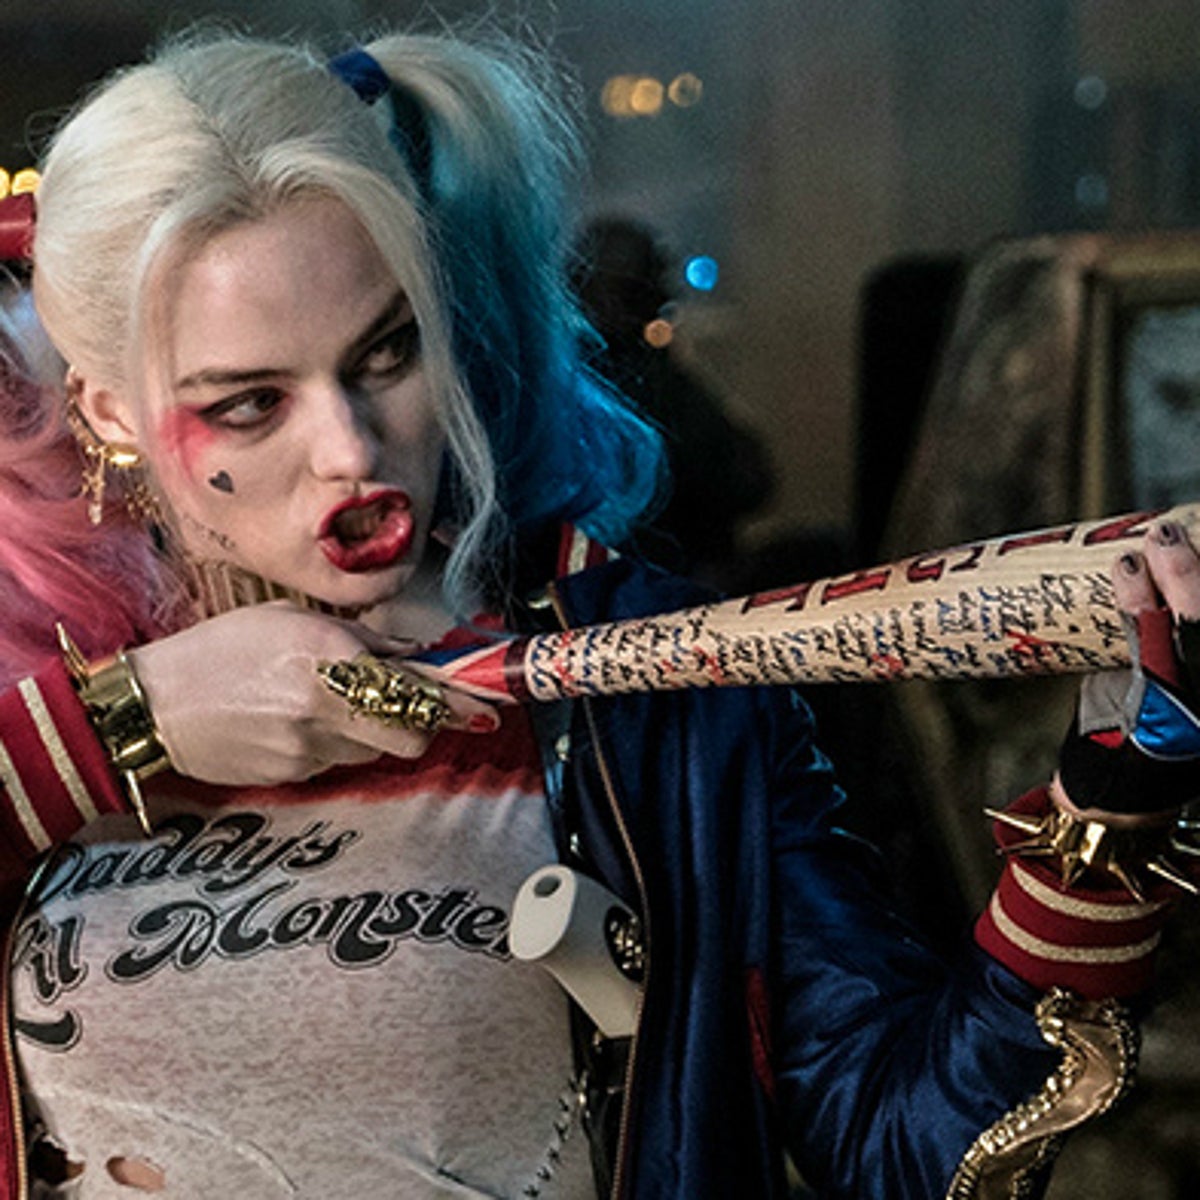 Margot Robbie's Harley Quinn Character From “Suicide Squad” Is